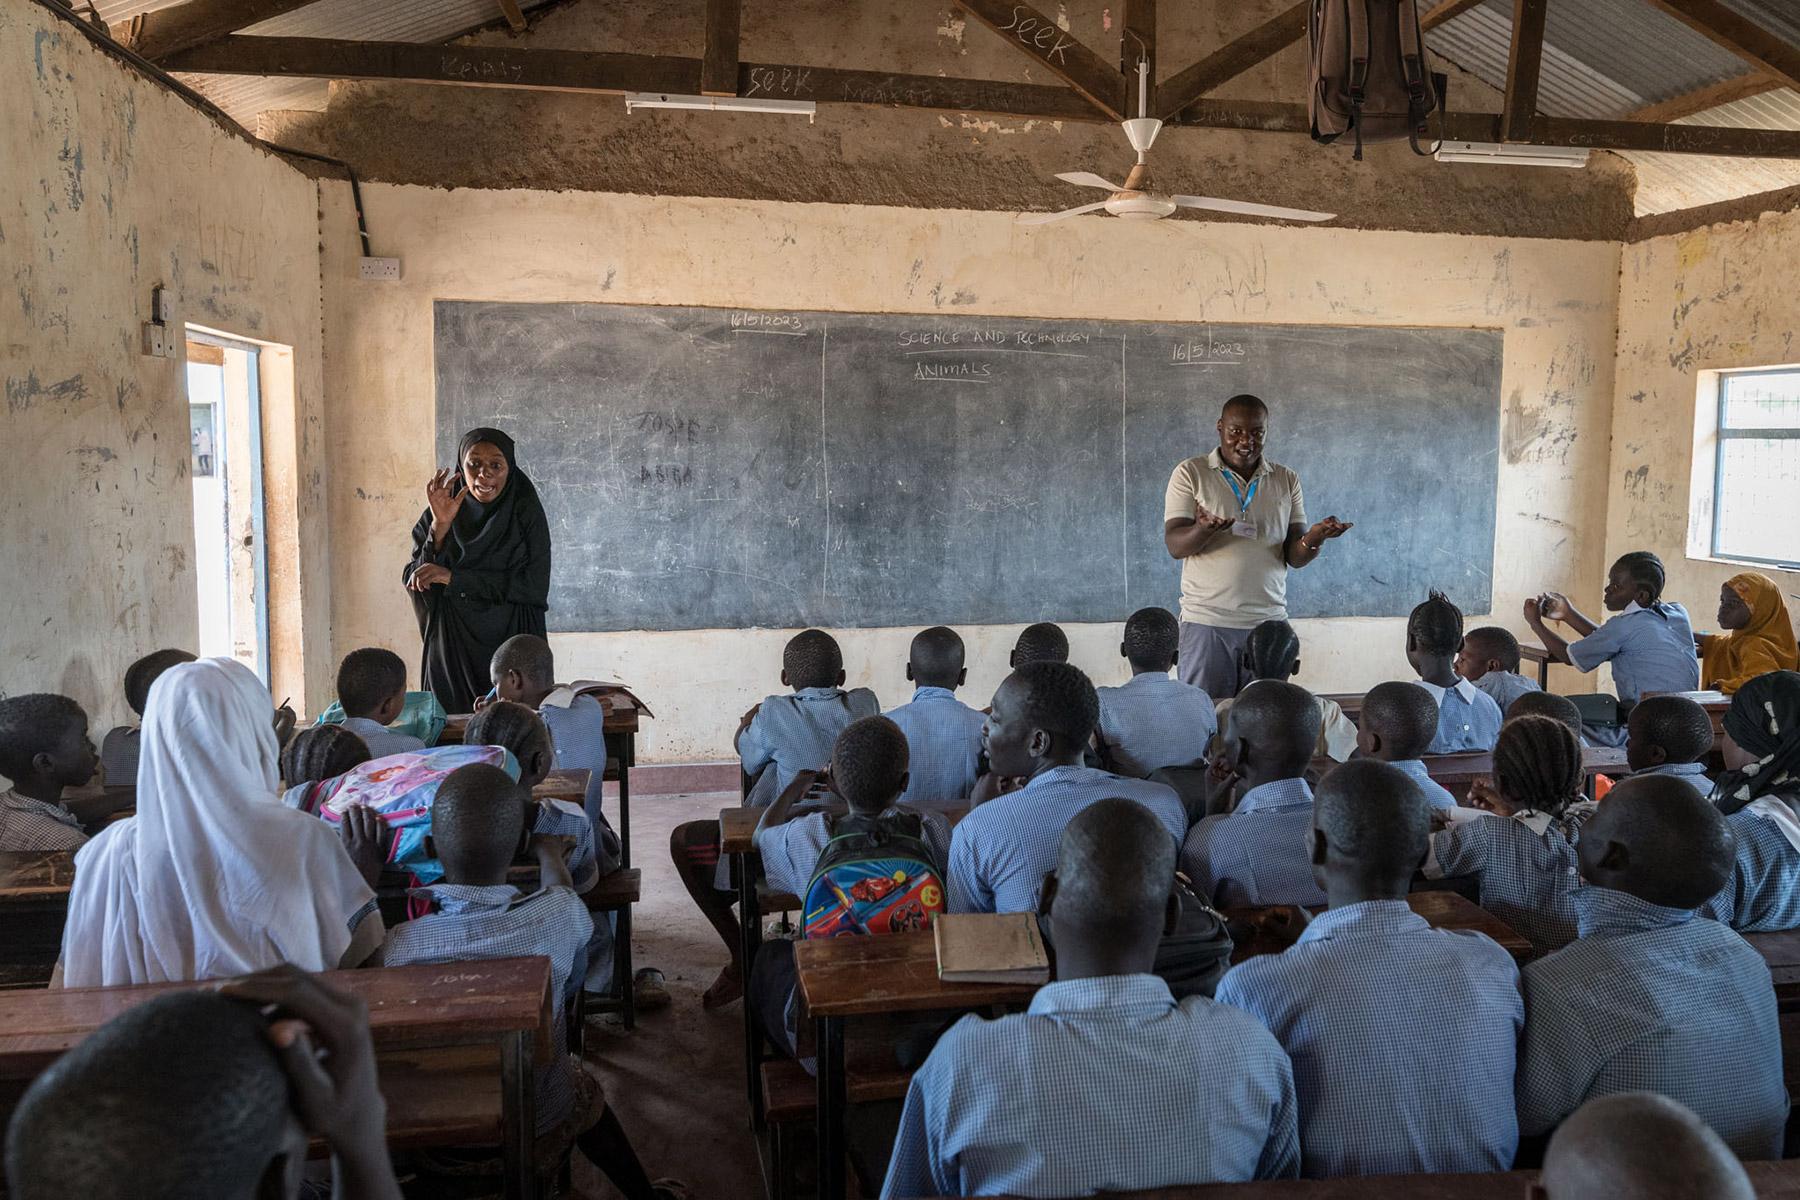 Class is underway at Shabele Primary School, taught by teacher Rogers Juma (right) and with sign-language interpretation given by Learning Support Assistant Amiza Lumumba (left). Photo: LWF/ Albin Hillert